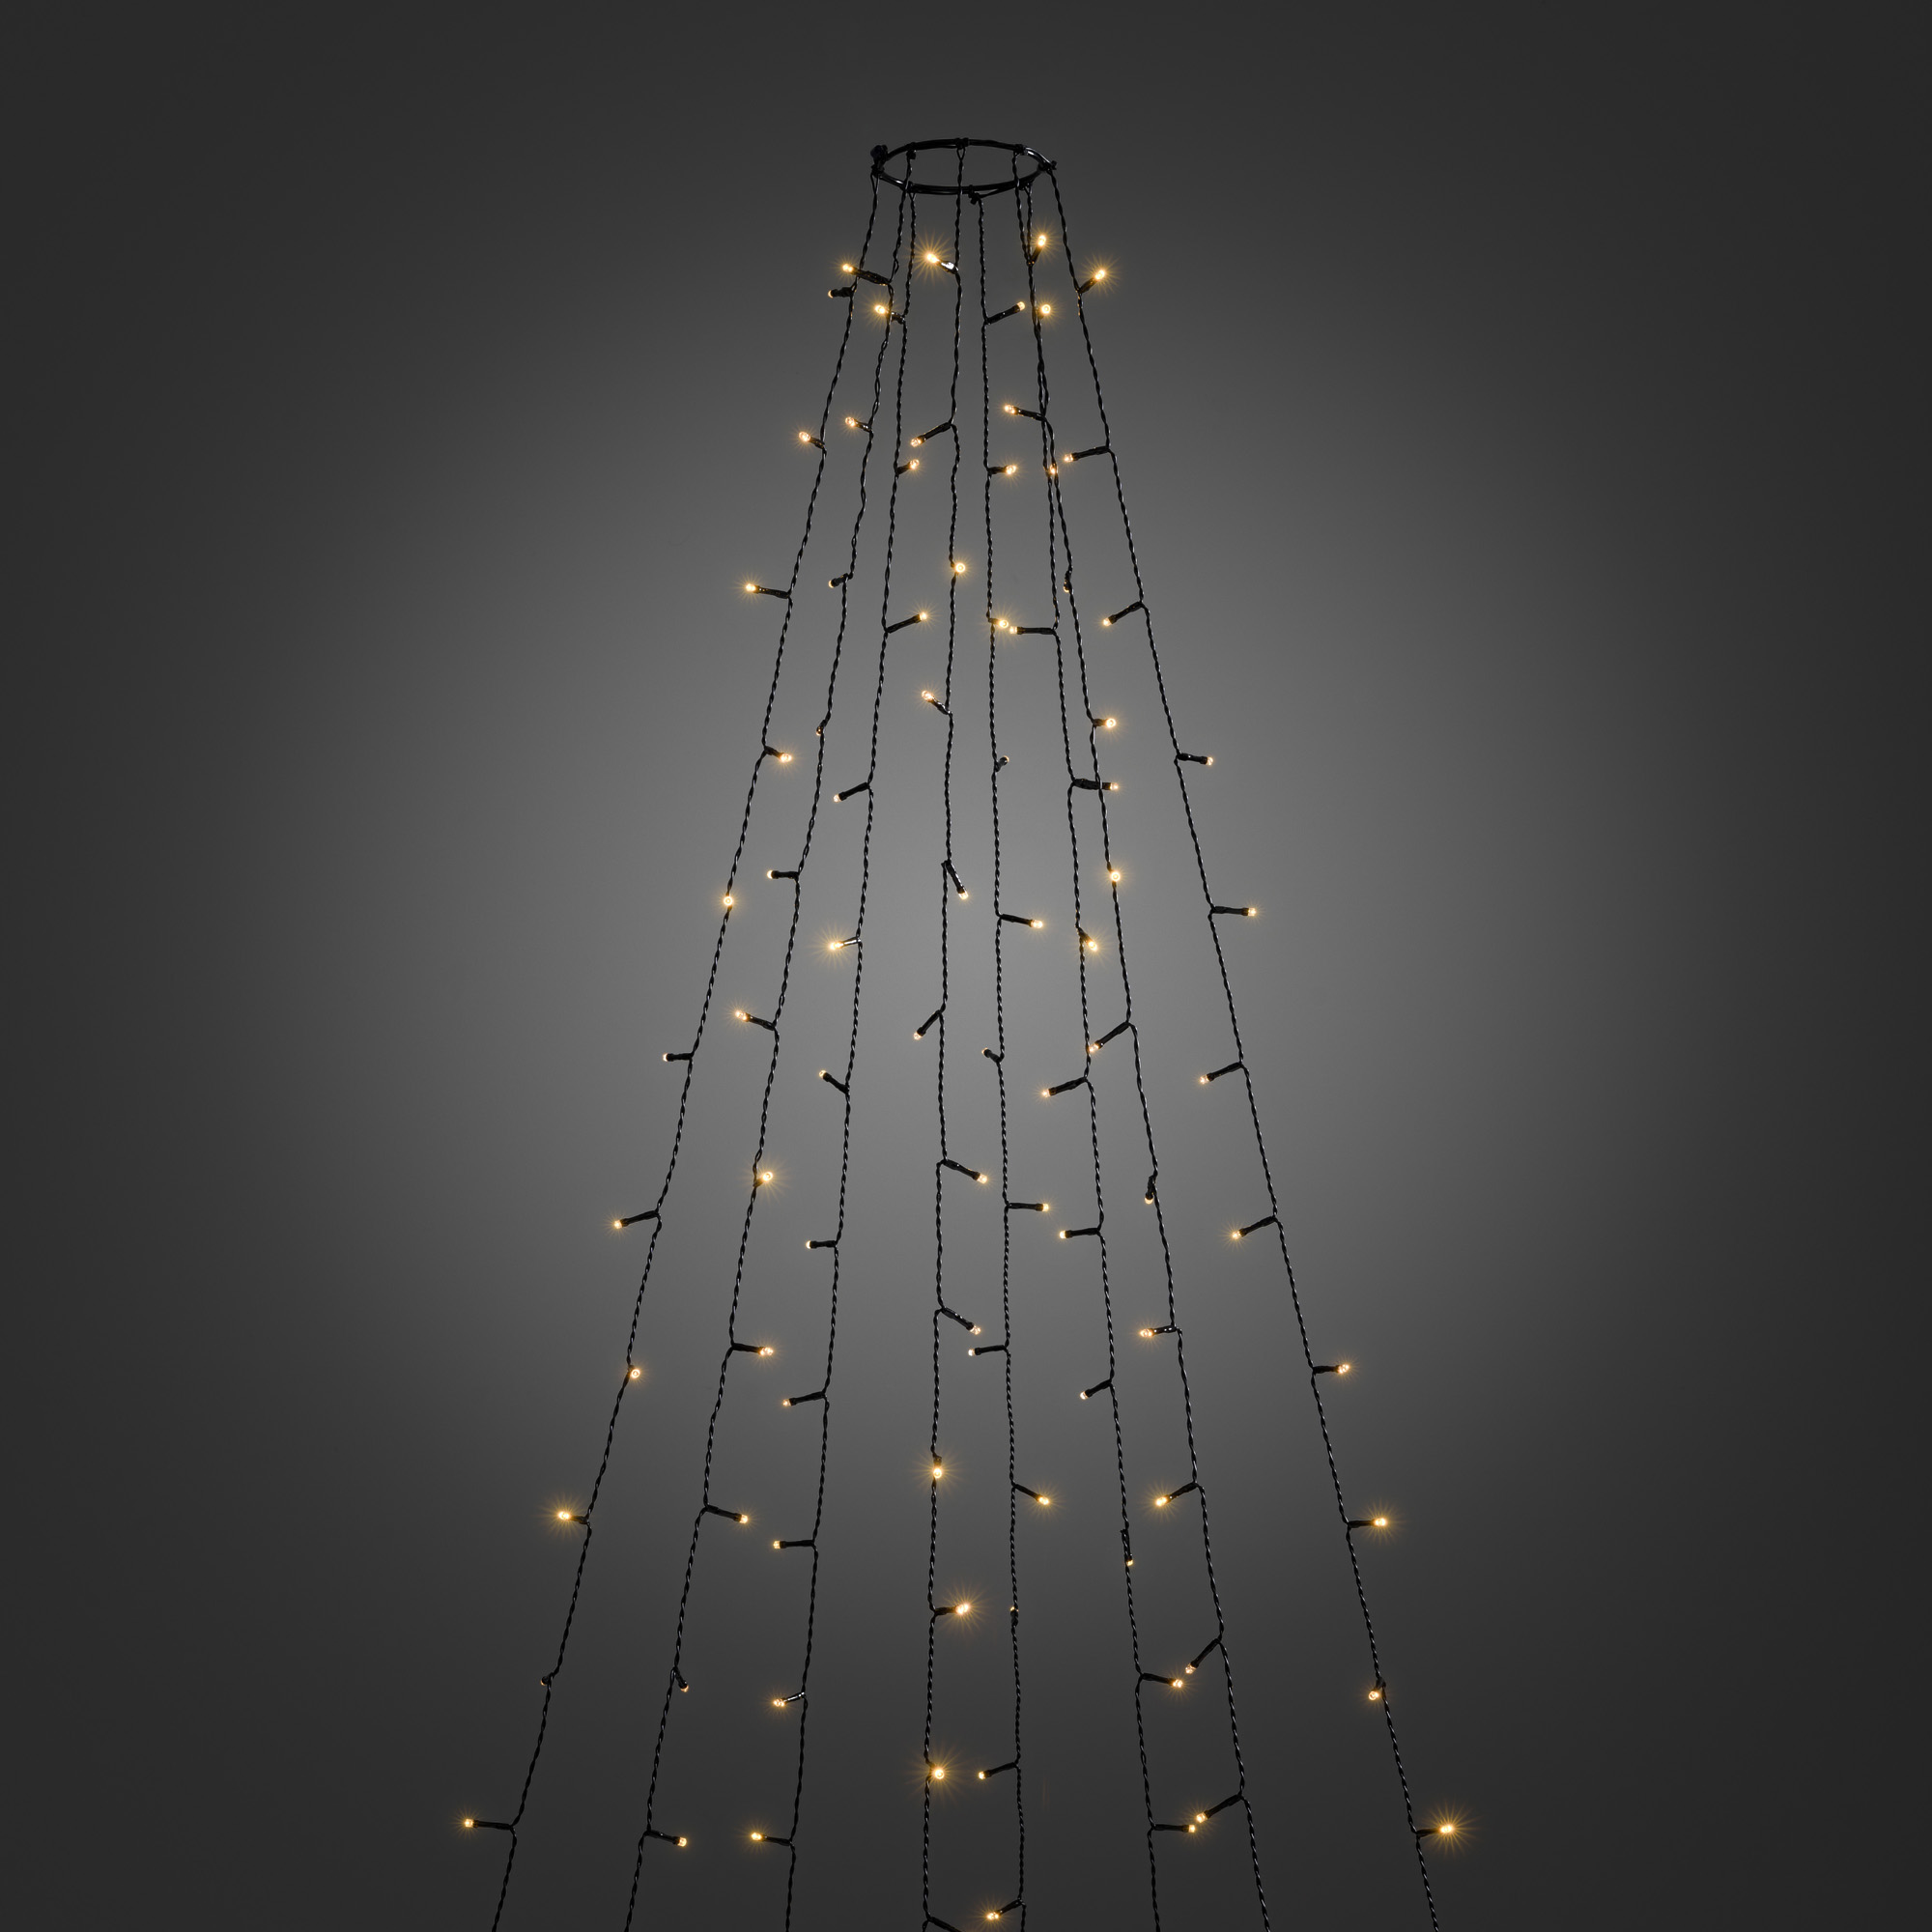 LED Tree Coat amber, 8 strings of 2.4m (30 LEDs each) with Glimmer Effect